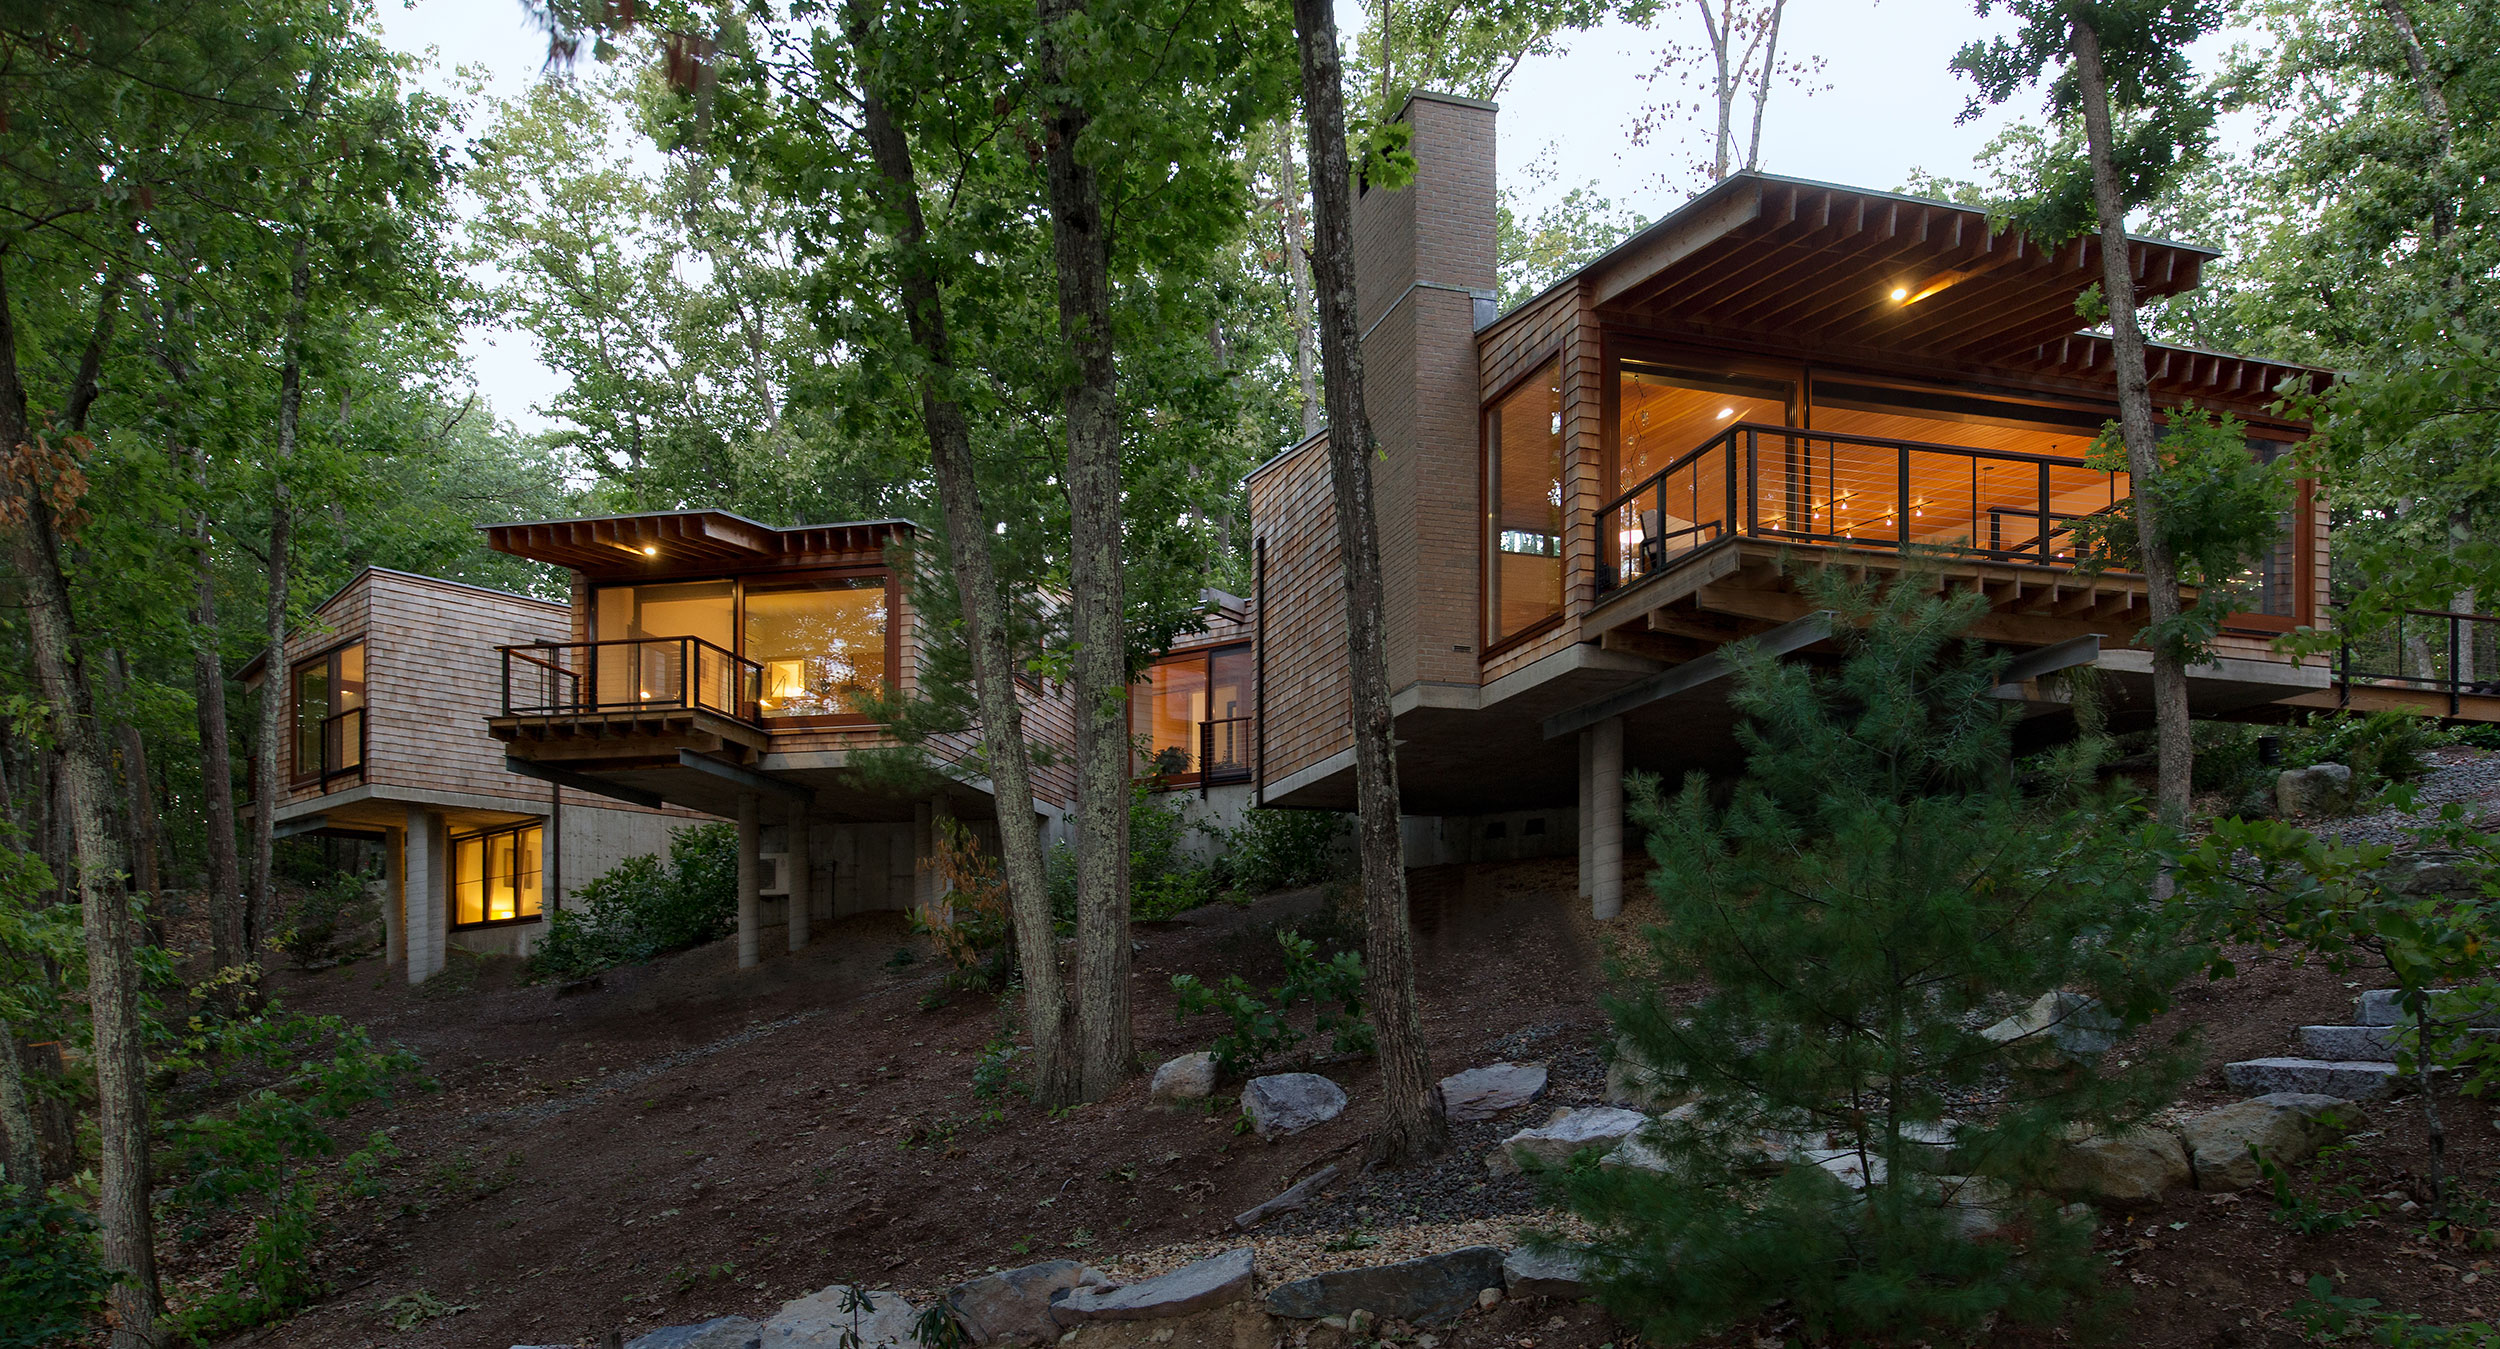 Bare Hill Residence by Peter Rose + Partners, in Harvard, MA. Photo: Chuck Choi.